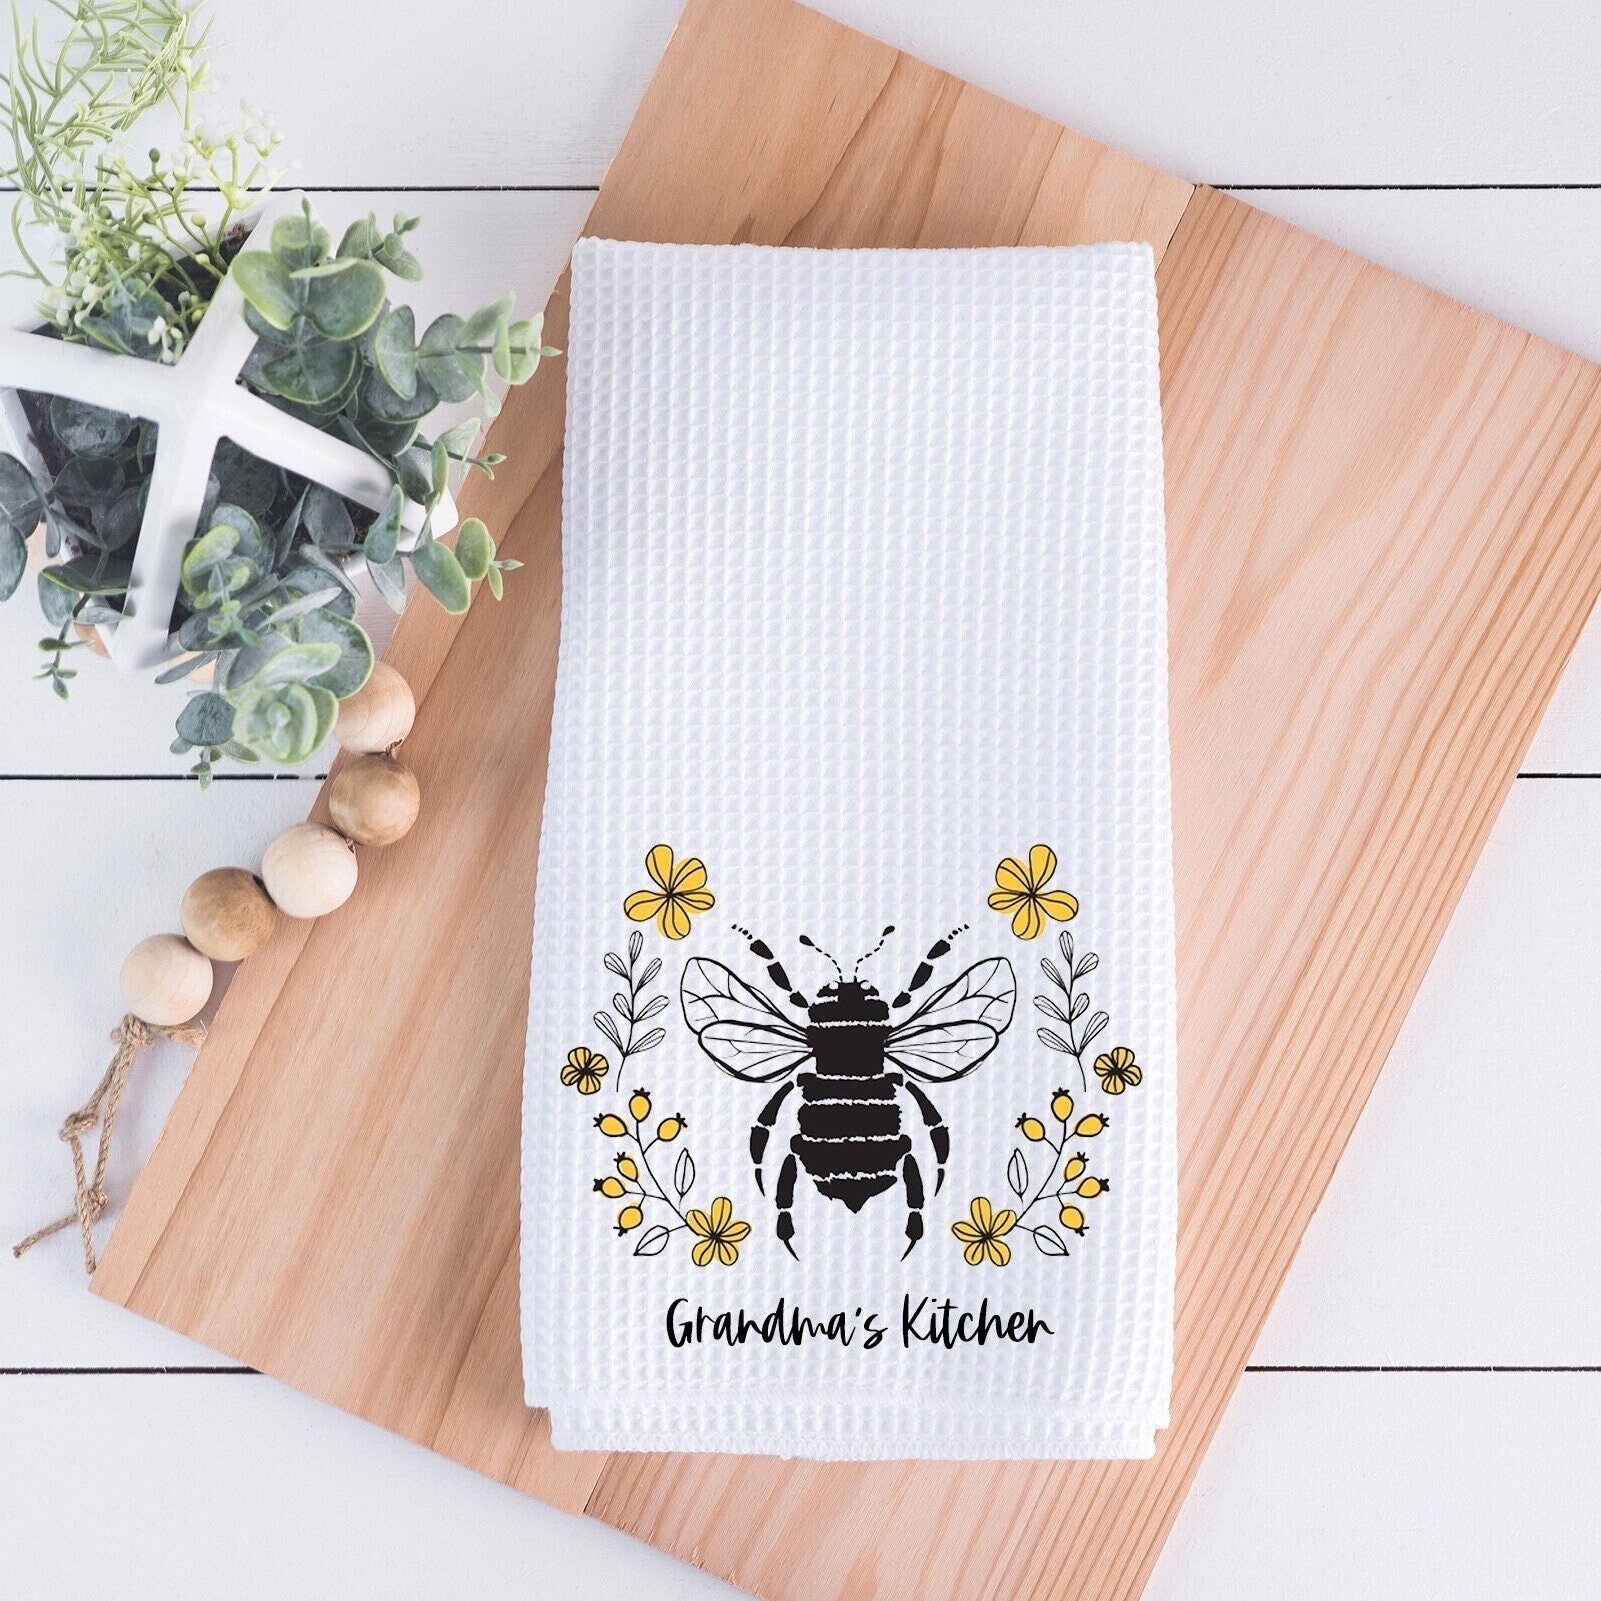 Custom Kitchen Towels (and giveaway!) - Sugar Bee Crafts